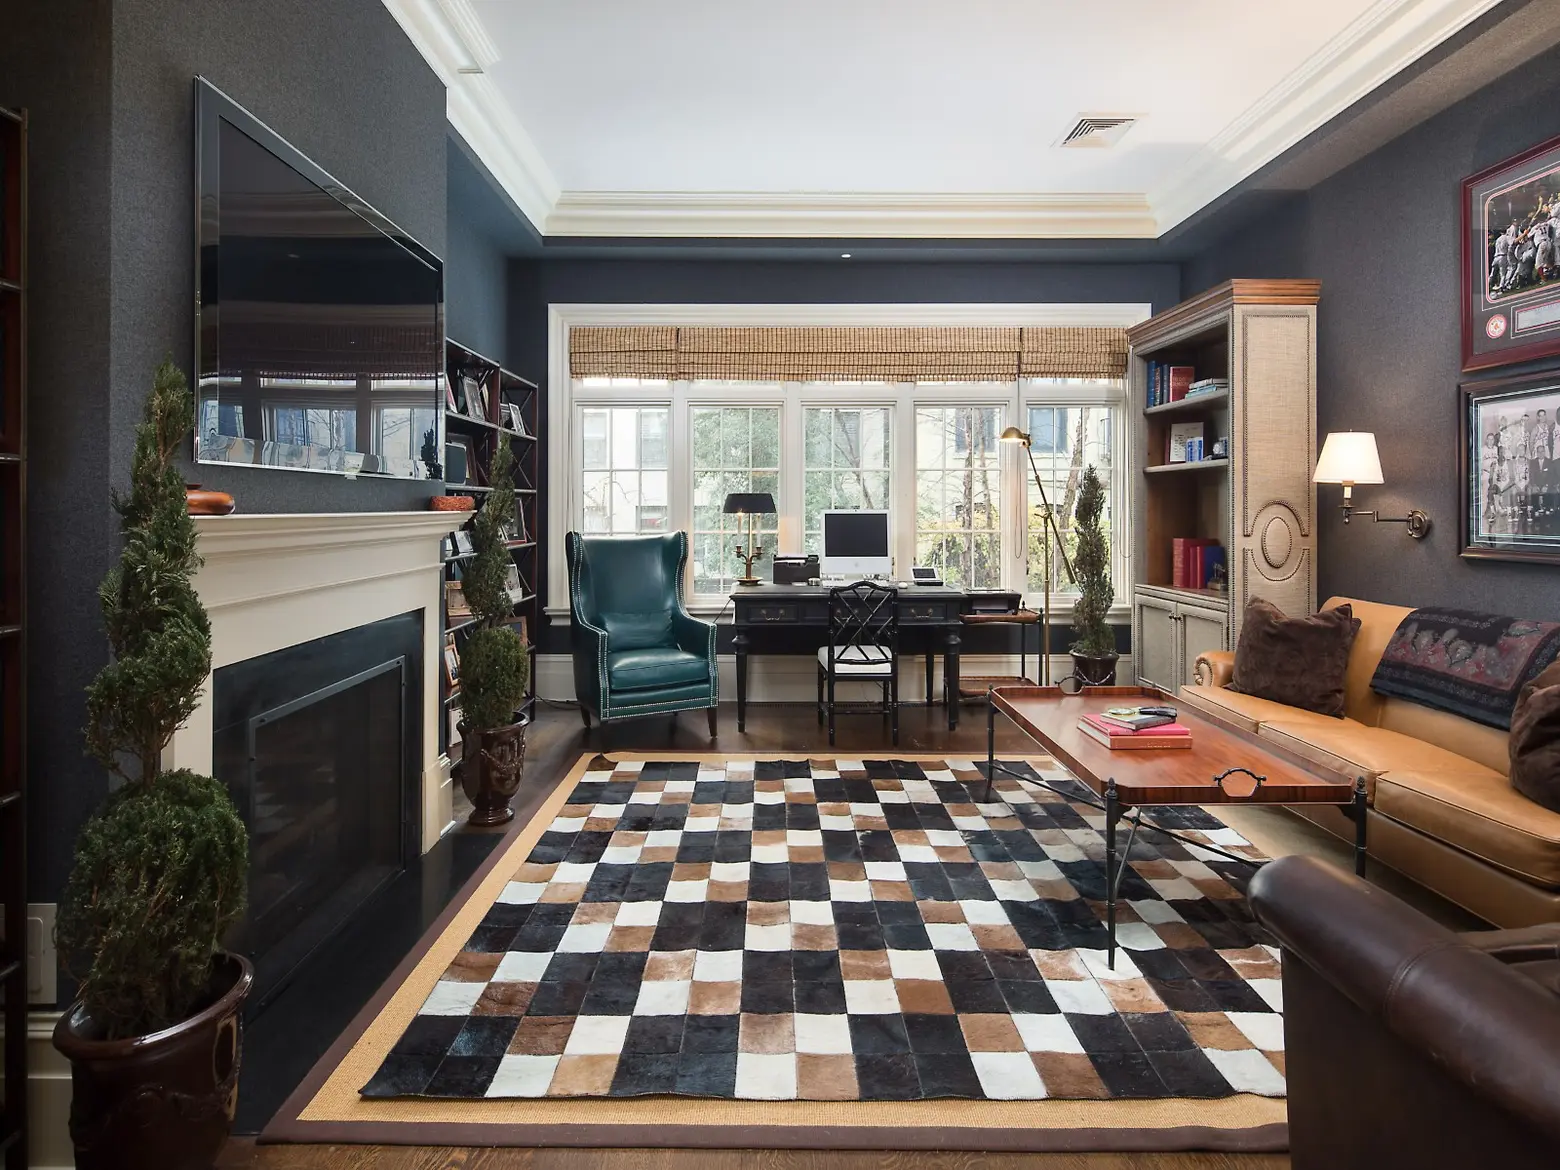 327 East 51st Street, Cool Listings, turtle bay, midtown east, townhouse, manhattan townhouse for sale, historic home